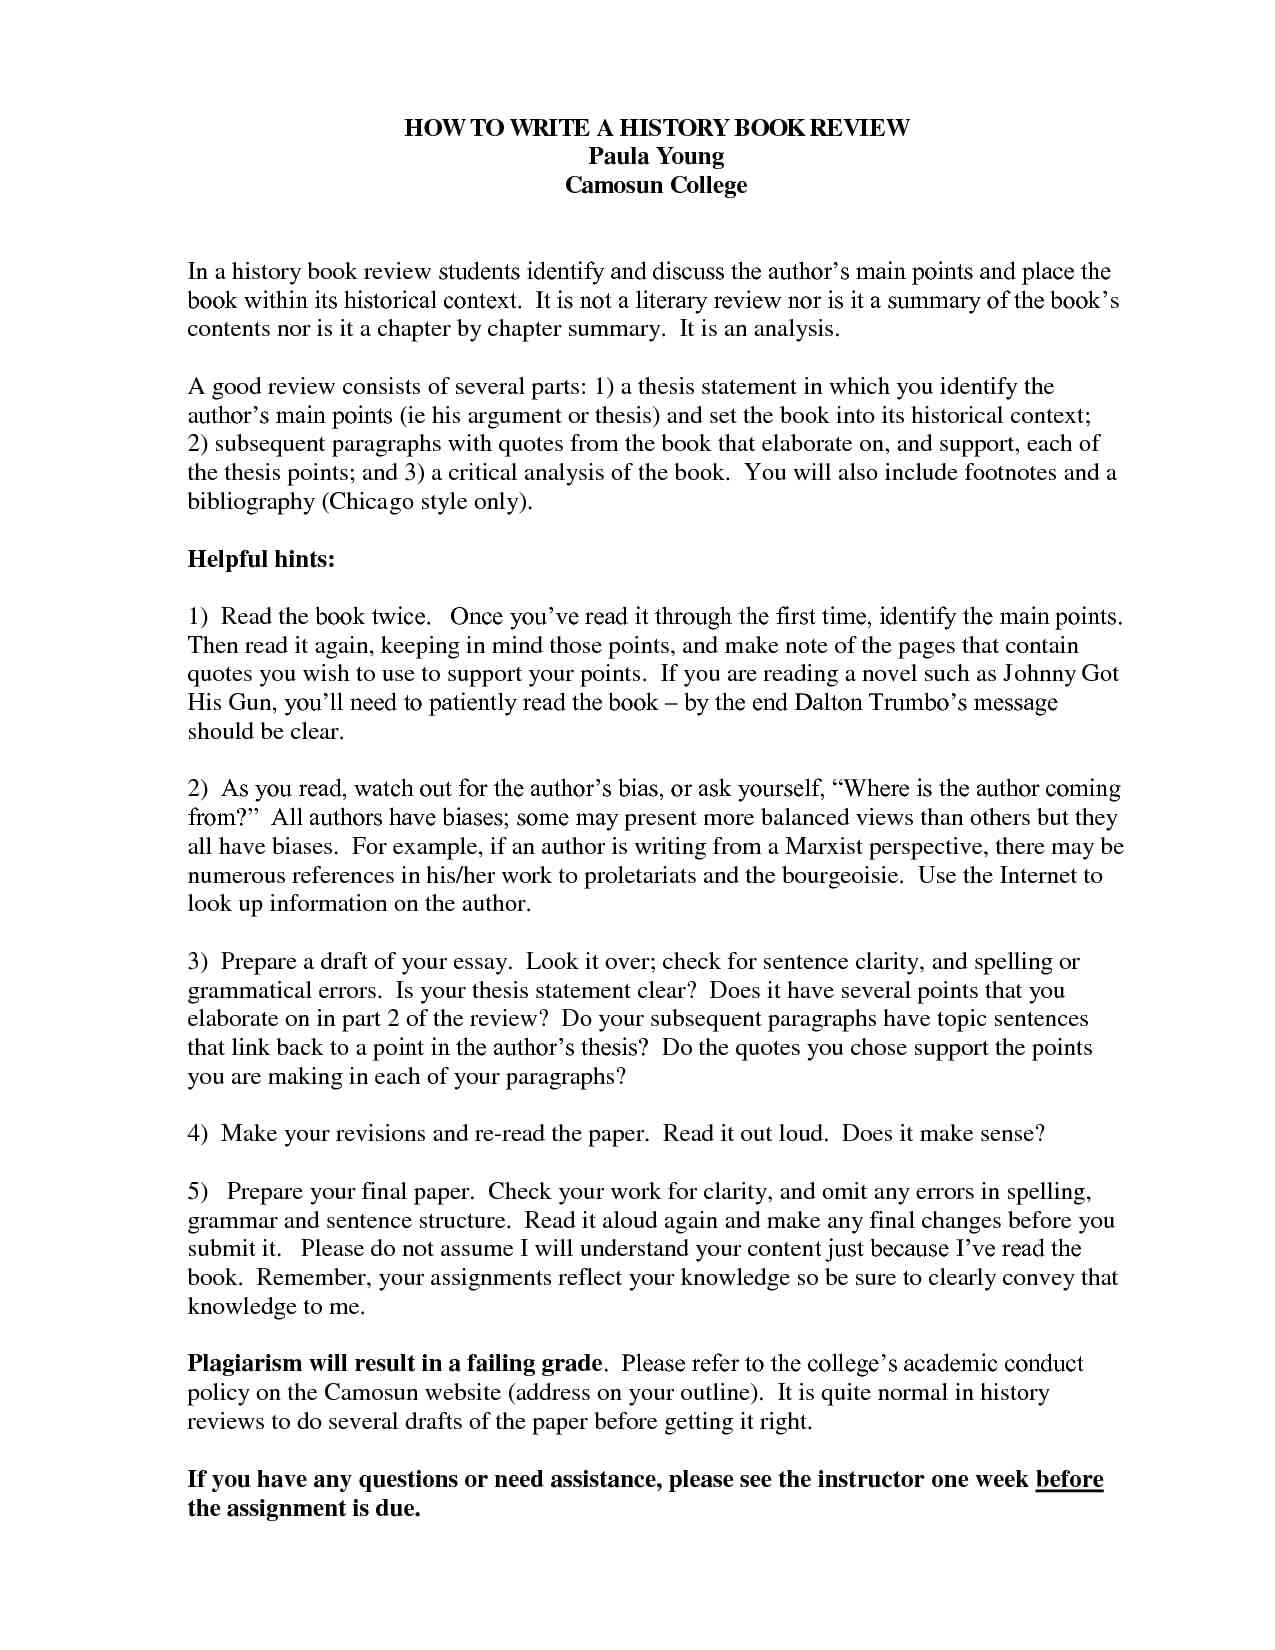 how to write an essay about a book review